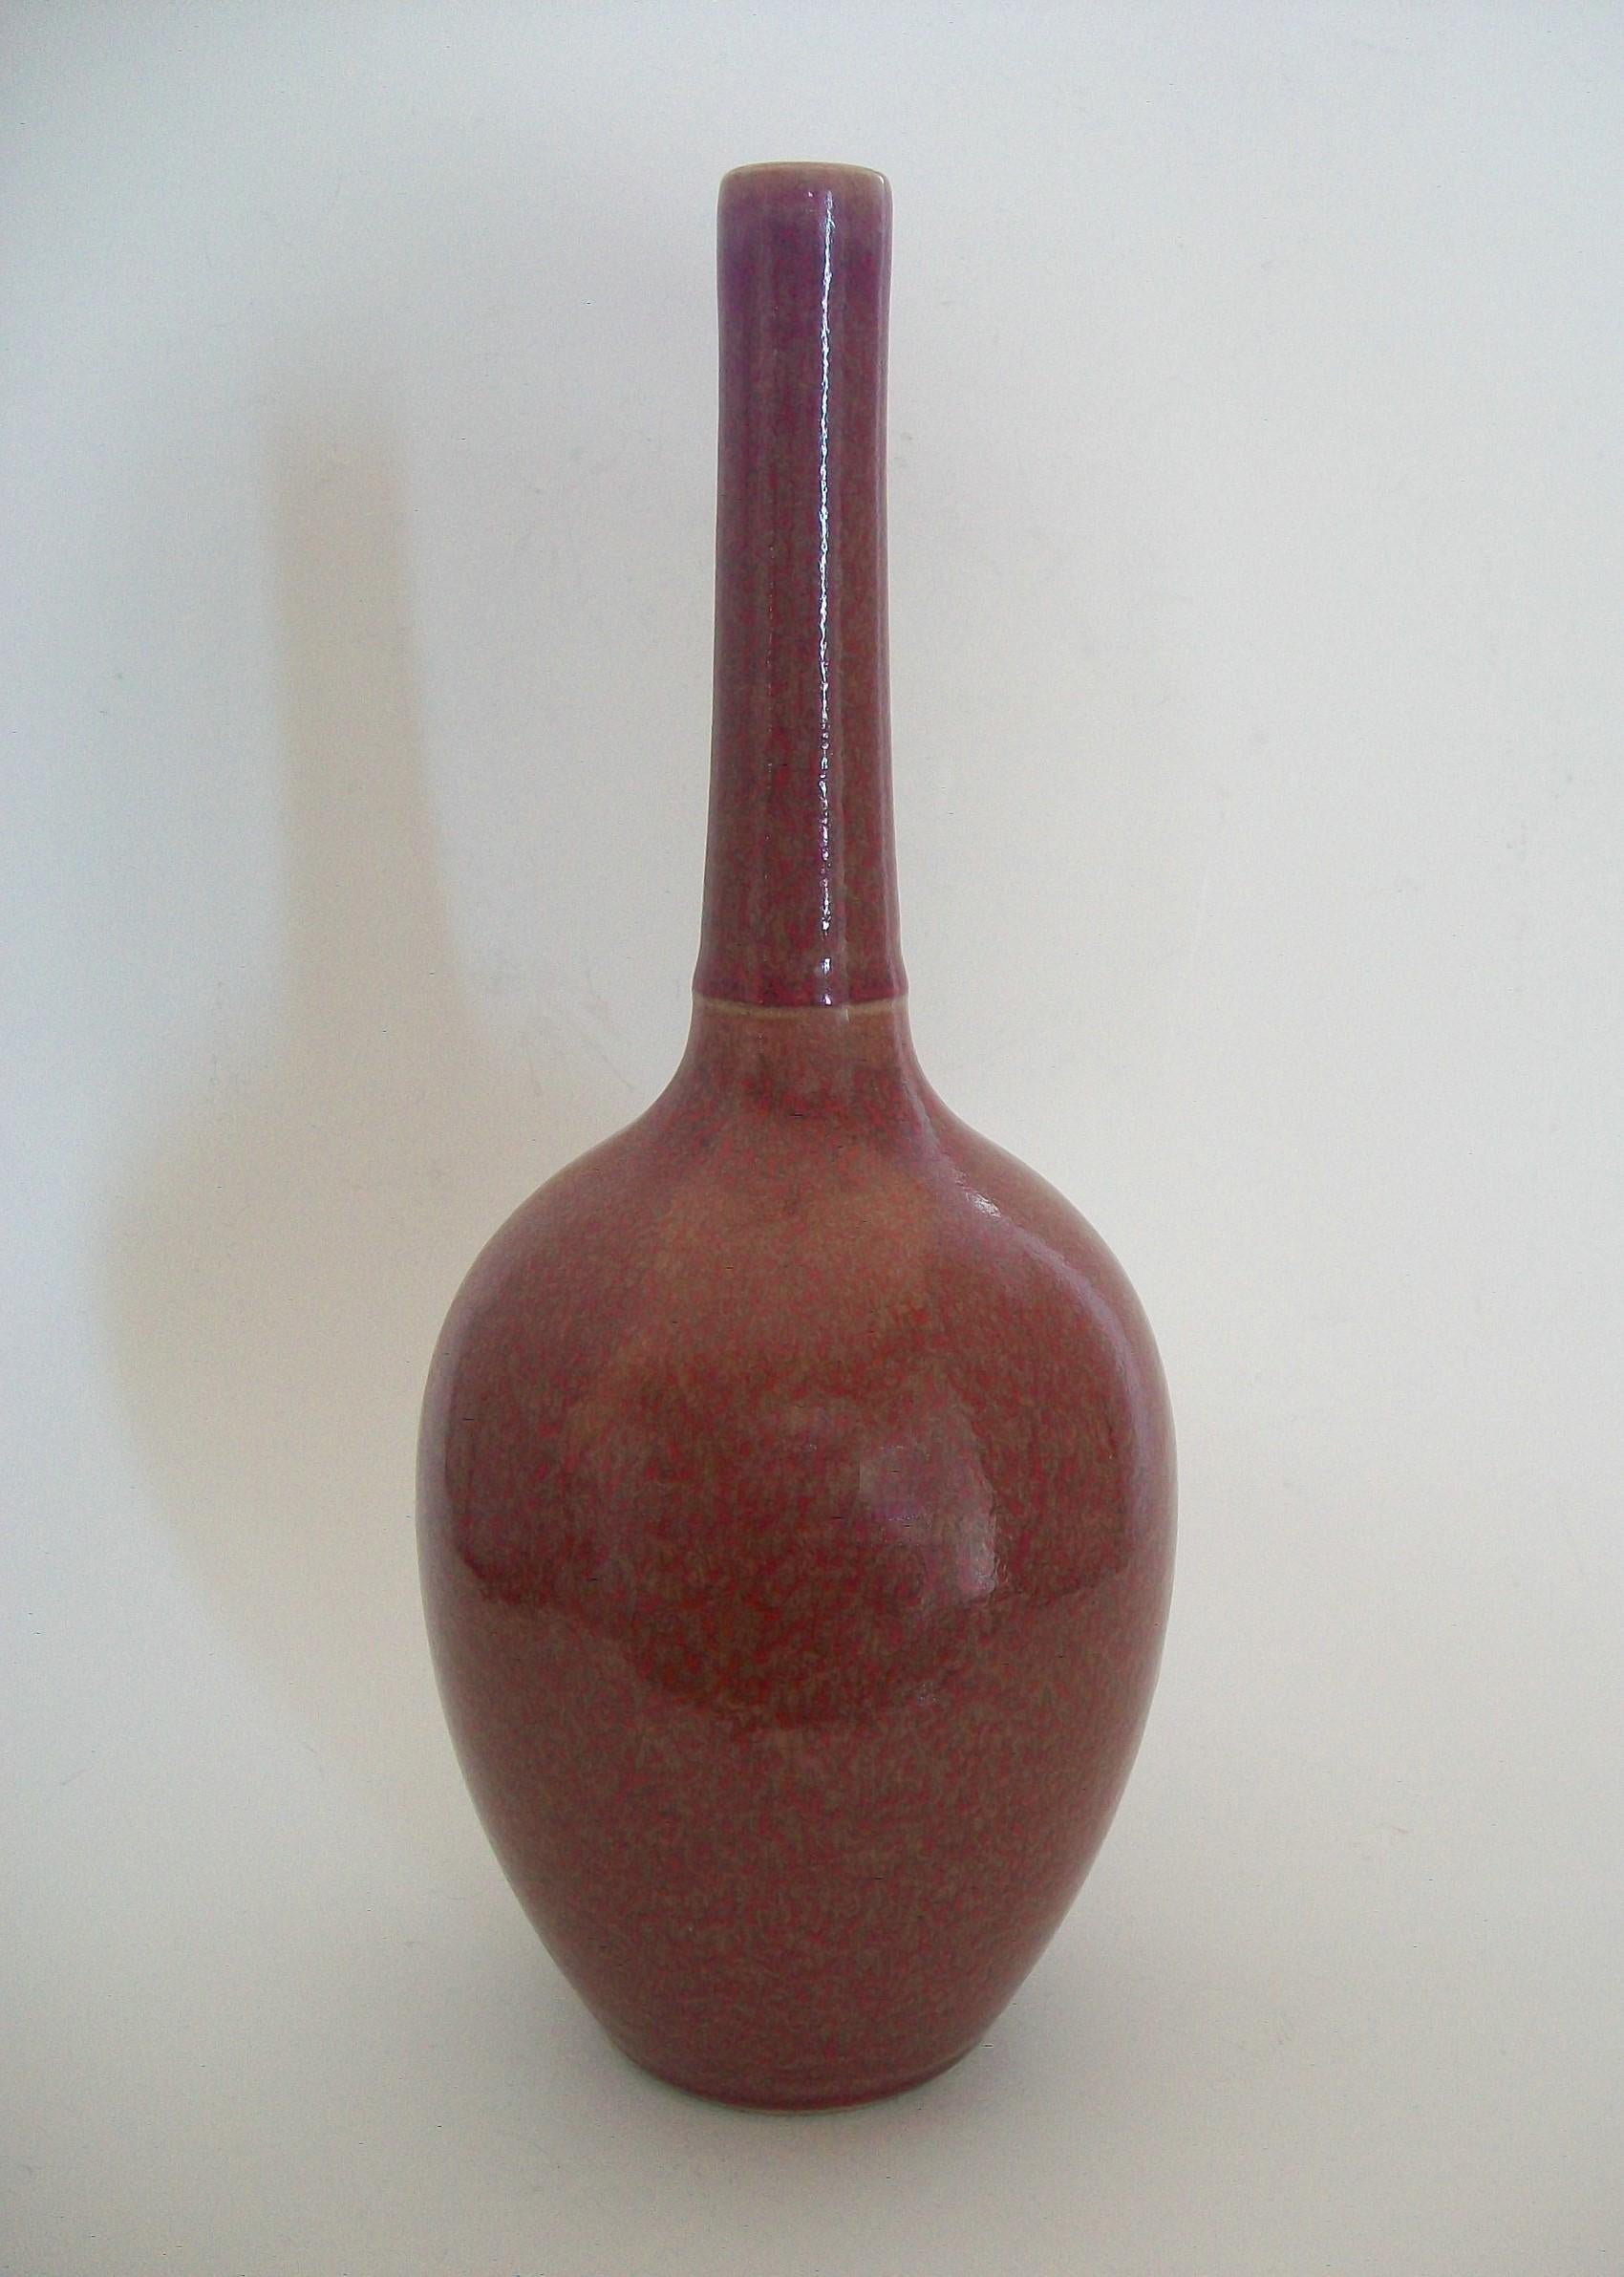 Antique Qing peach-bloom glazed ceramic bottle neck vase - featuring an elegant form with a single string to the elongated neck - mottled glaze with red splashed over a pinkish beige base color - six character mark to the base in underglaze blue -